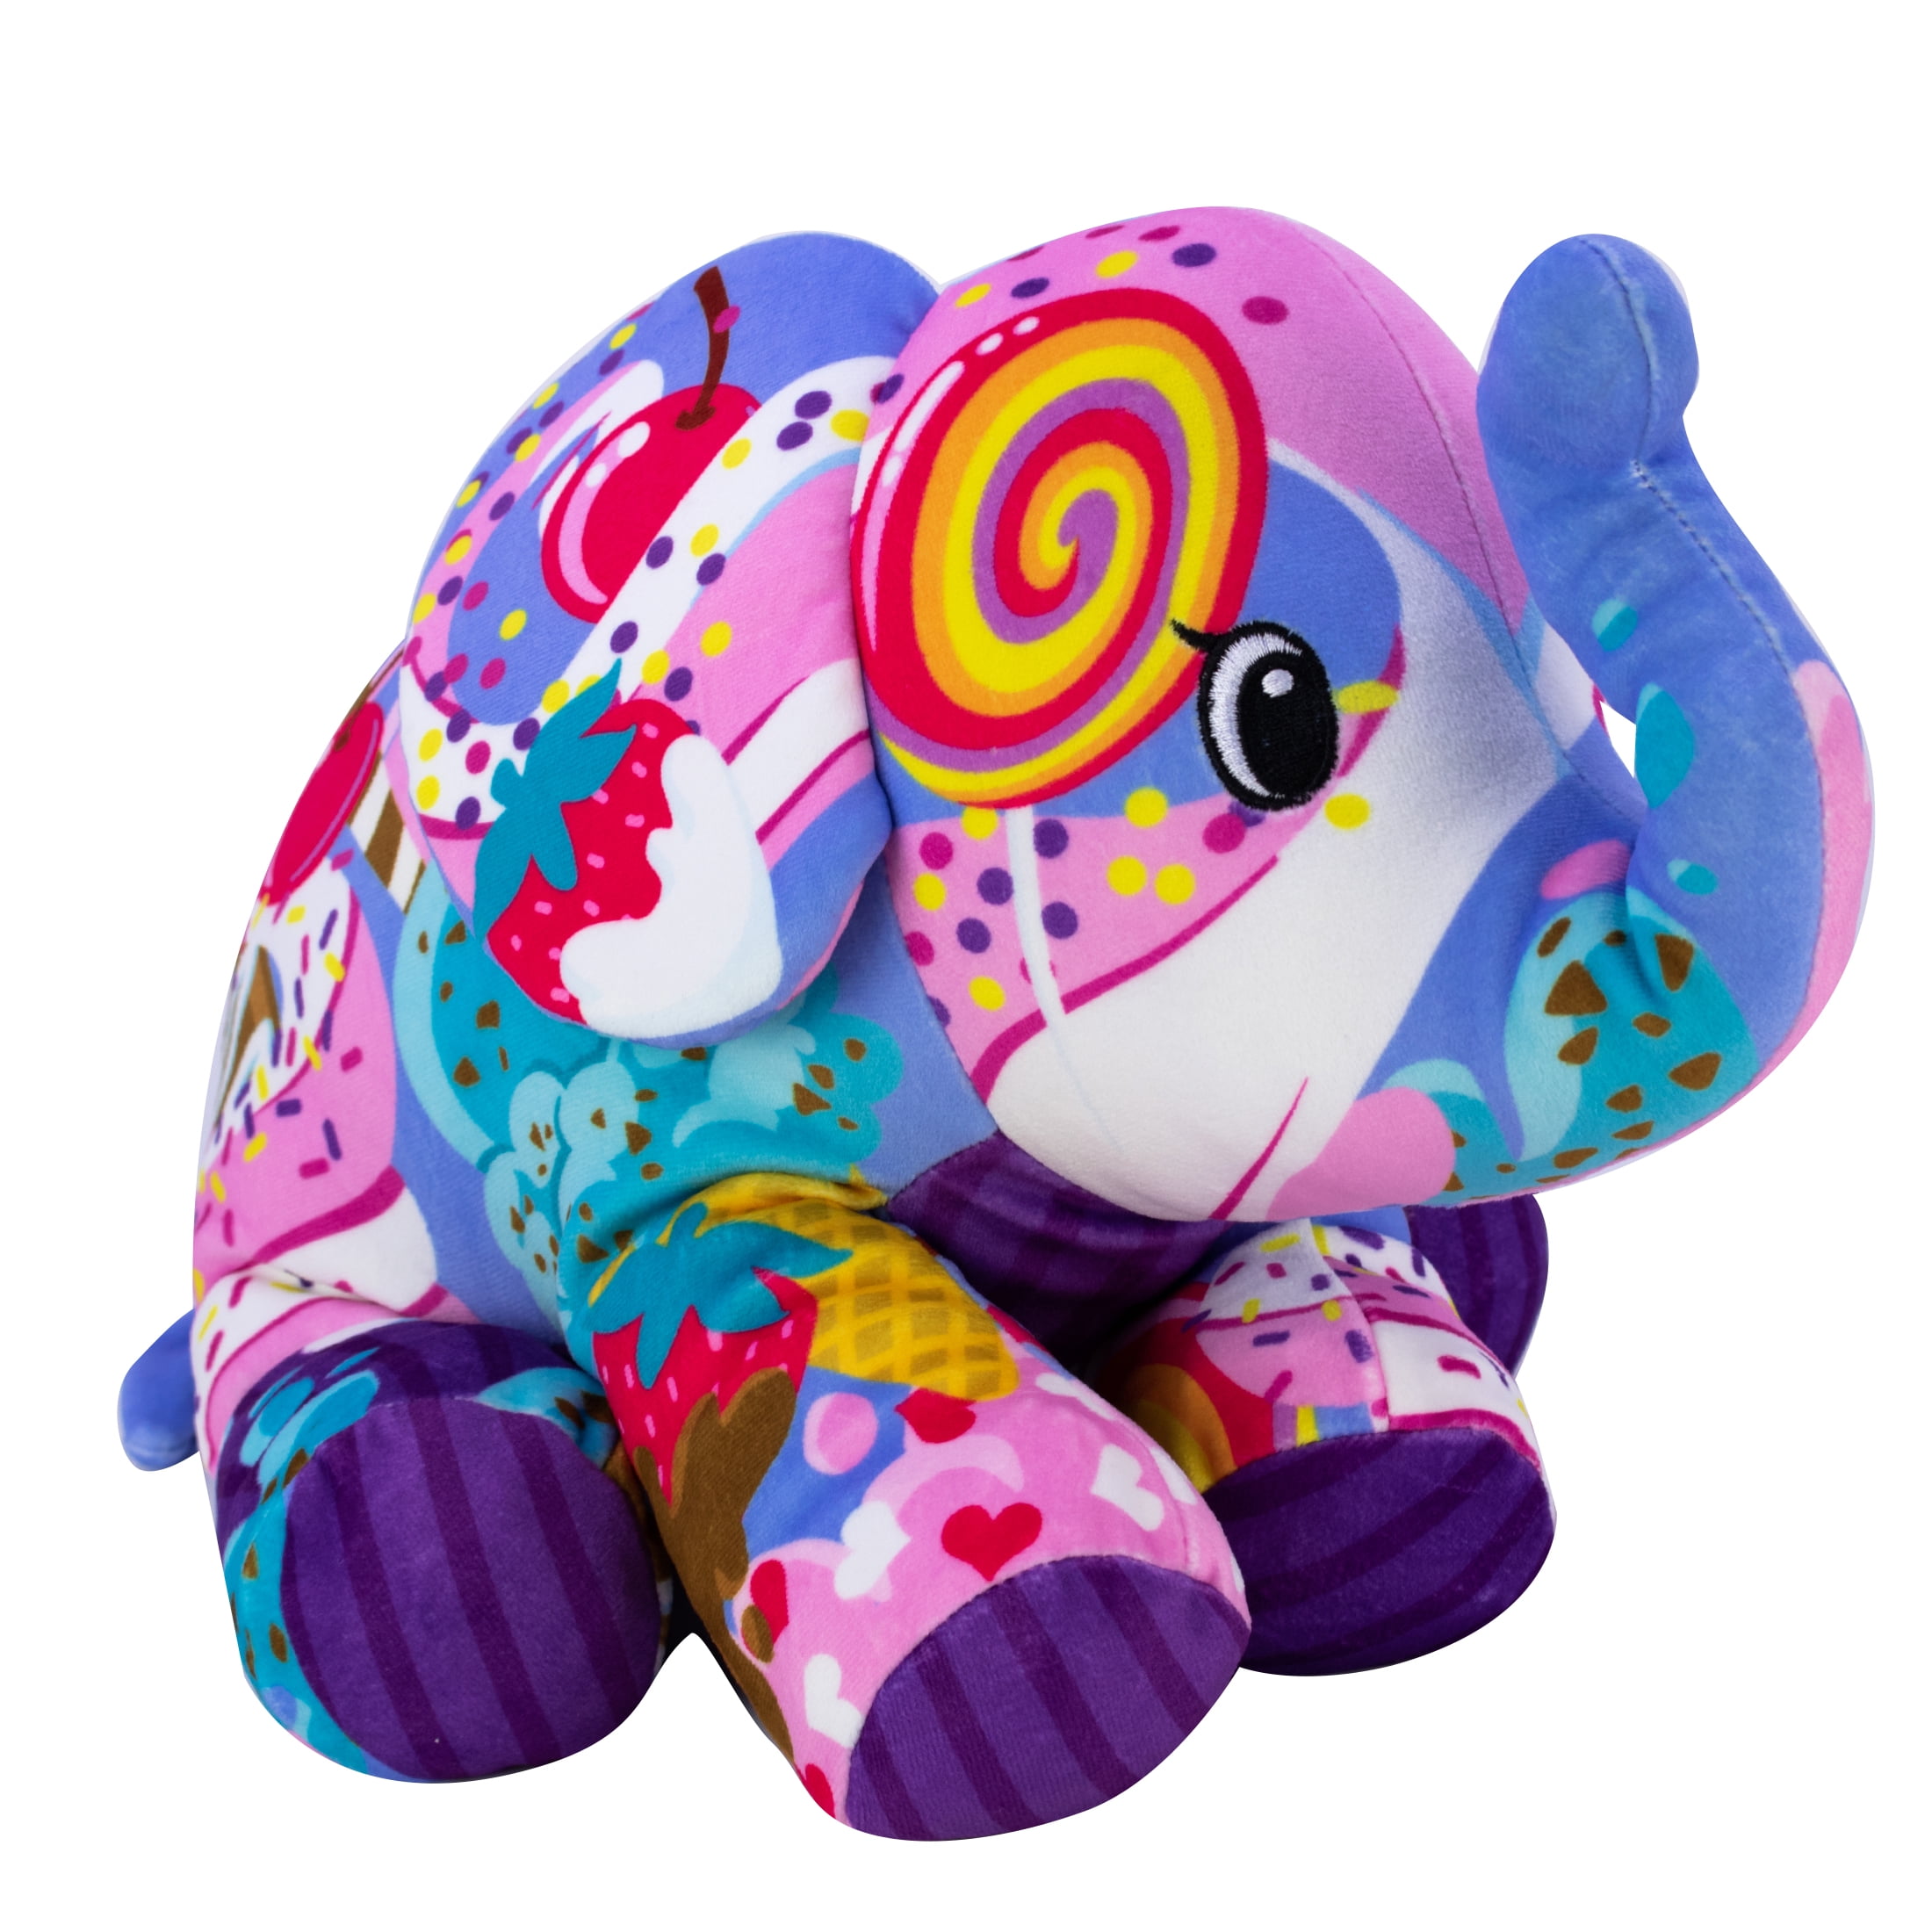 Pop Art Soft 10" Mammoth - Sweetie, the Ultra-Soft, Bean-Filled, Sweet Treat Themed Plush Toy